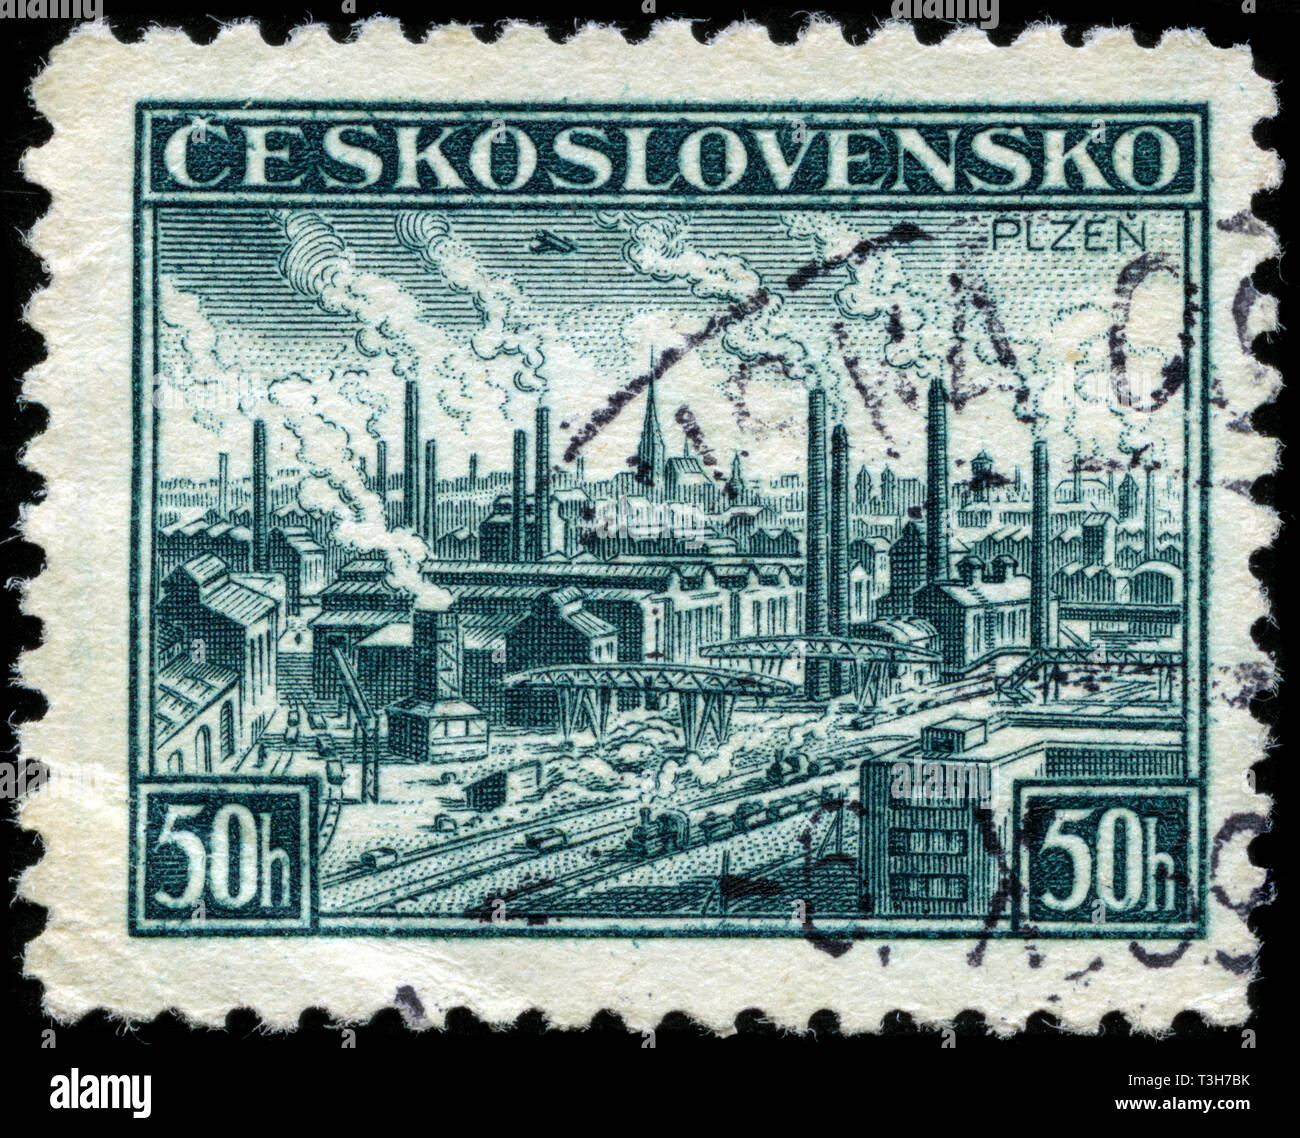 Postage stamp from the former state Czechoslovakia in the Pilsen and Košice Exhibitions series issued in 1938 Stock Photo